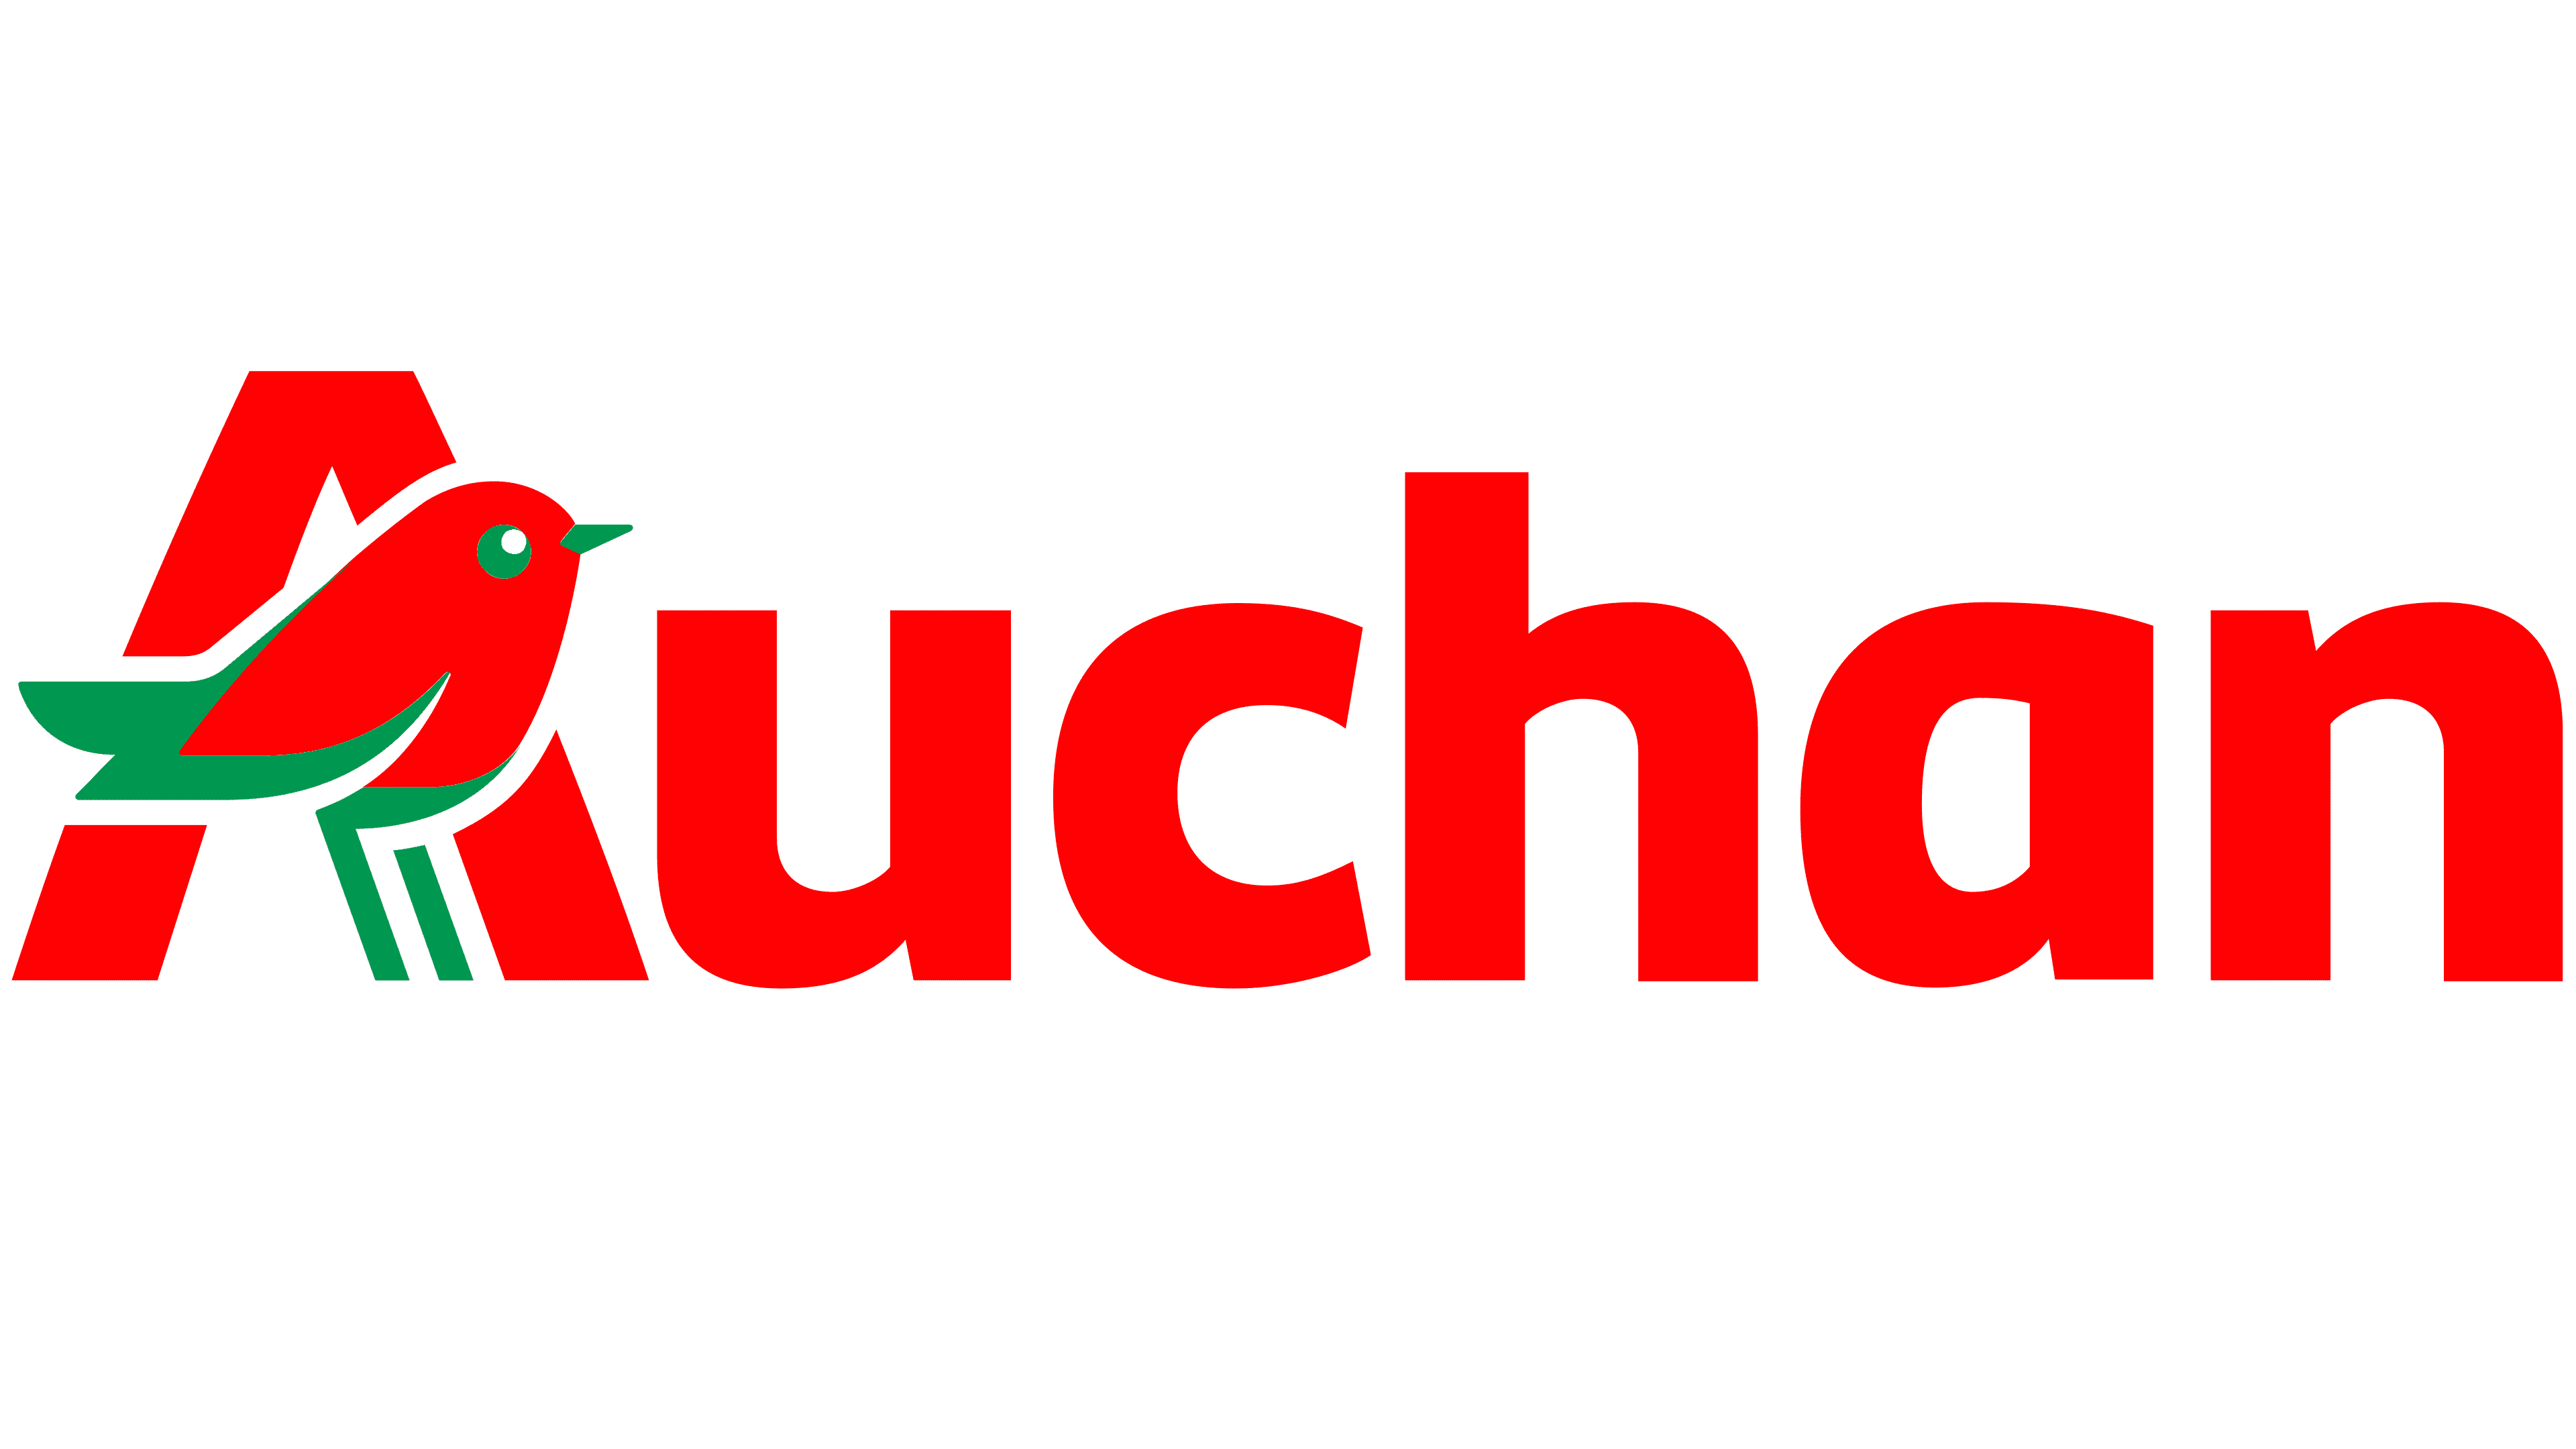 Auchan Logo, PNG, Symbol, History, Meaning